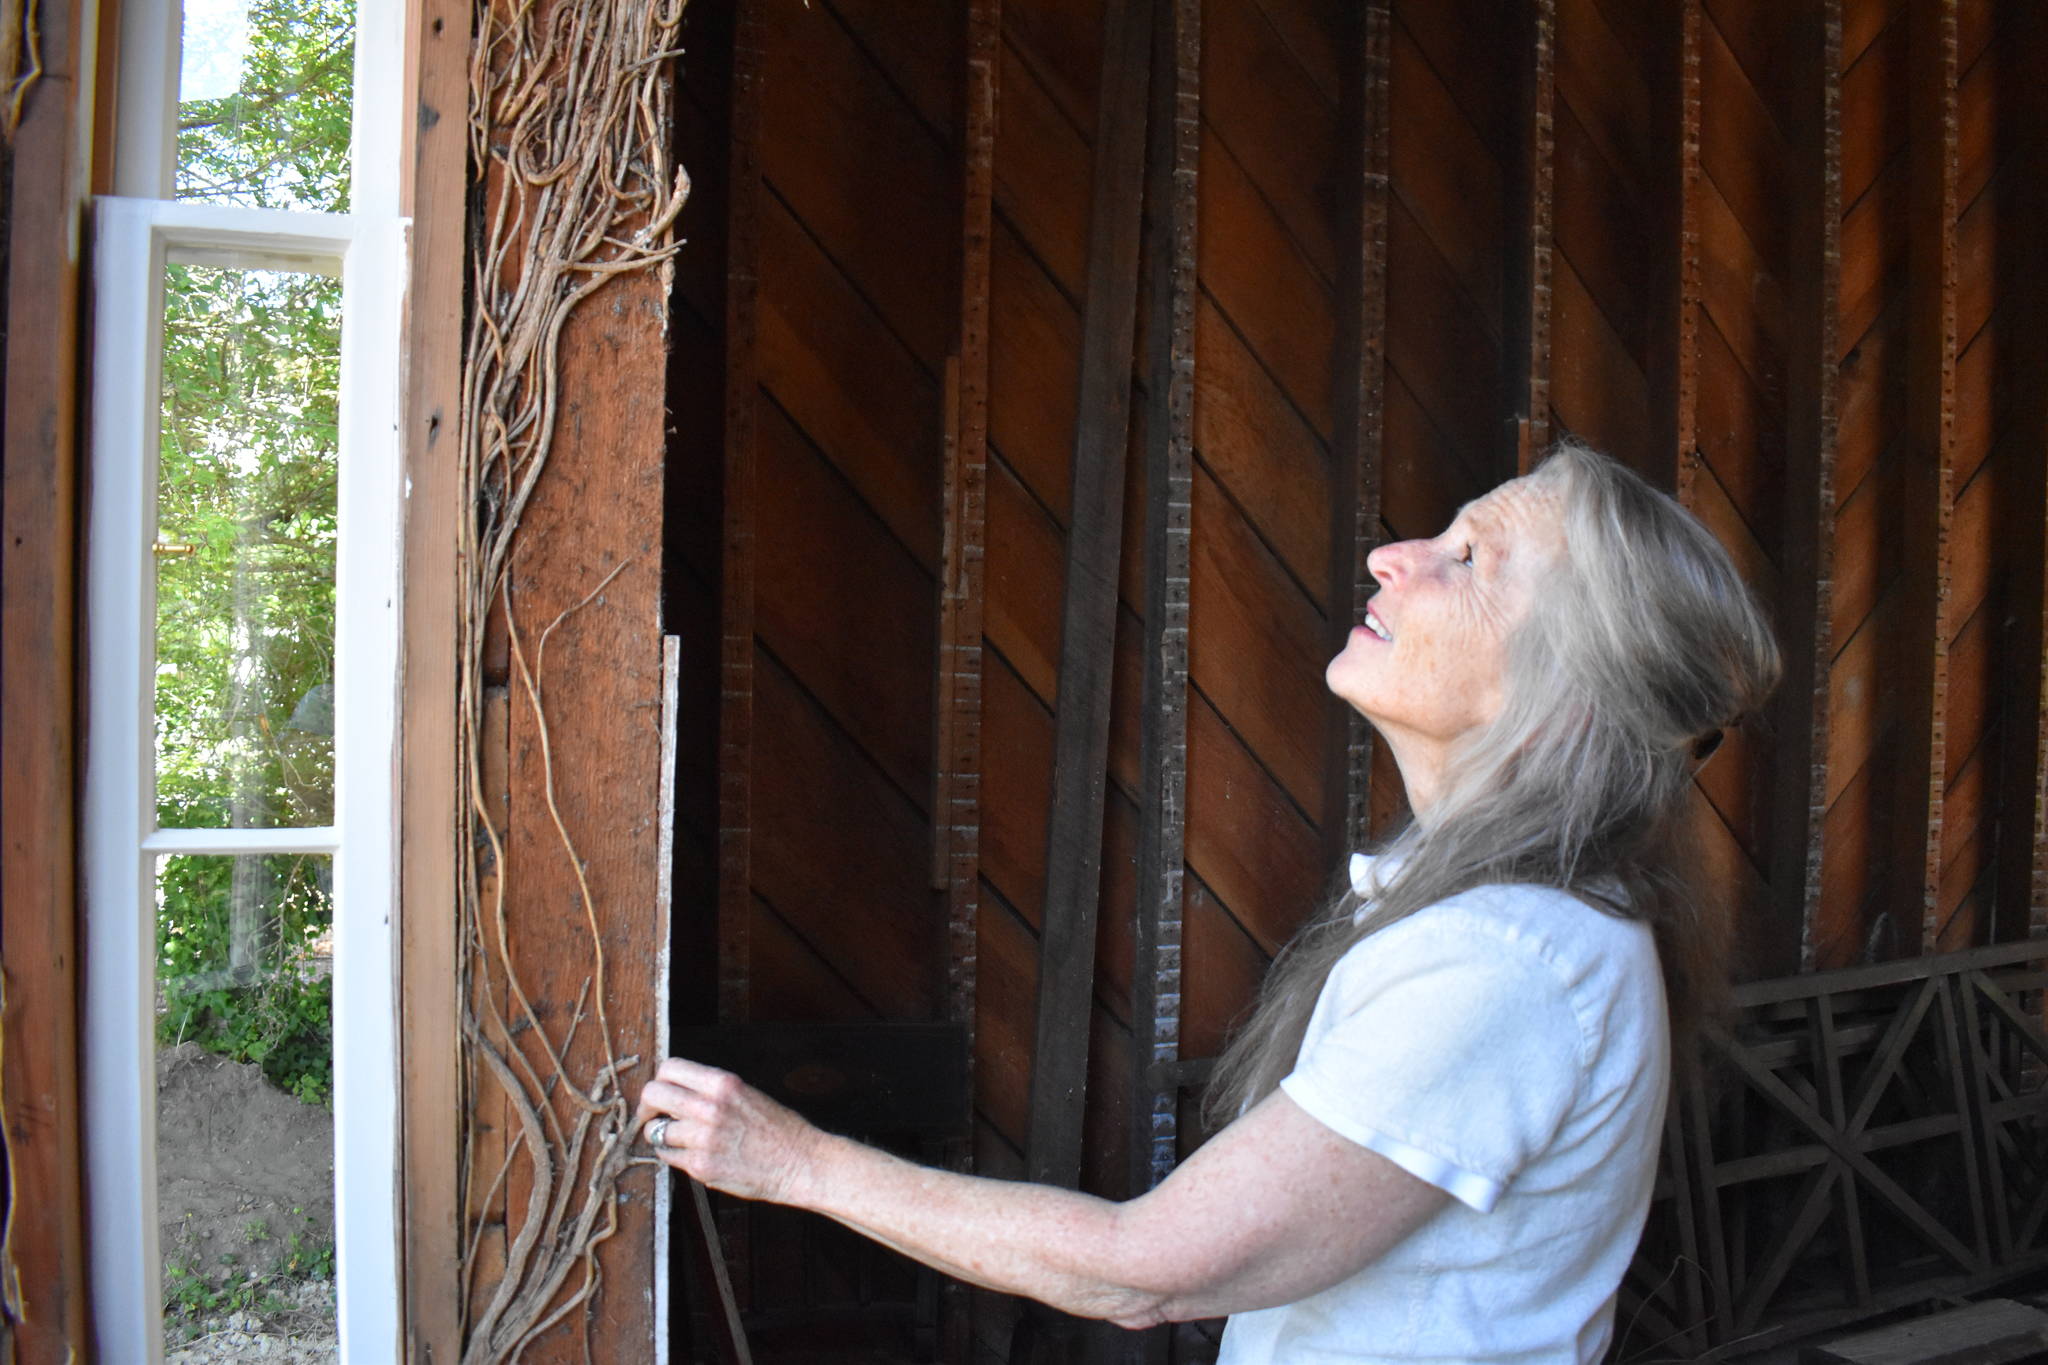 Photo by Emily Gilbert/Whidbey News-Times
Historic Whidbey Executive Director Lynn Hyde looks up at the stubborn vine that snakes up the inside of what was once a formal parlor inside Haller House in Coupeville.